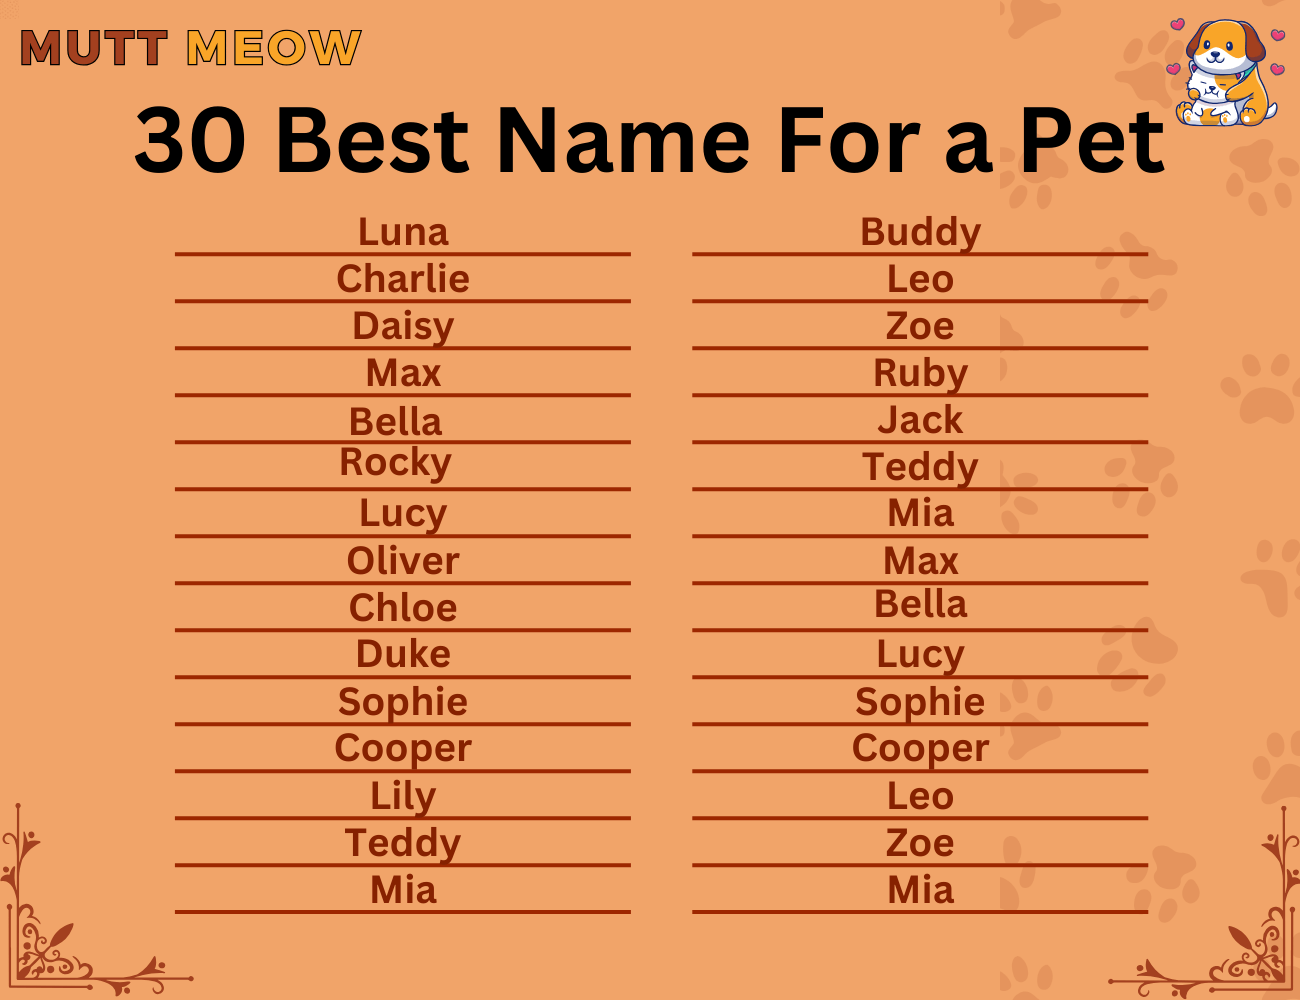 30 best name for a pet